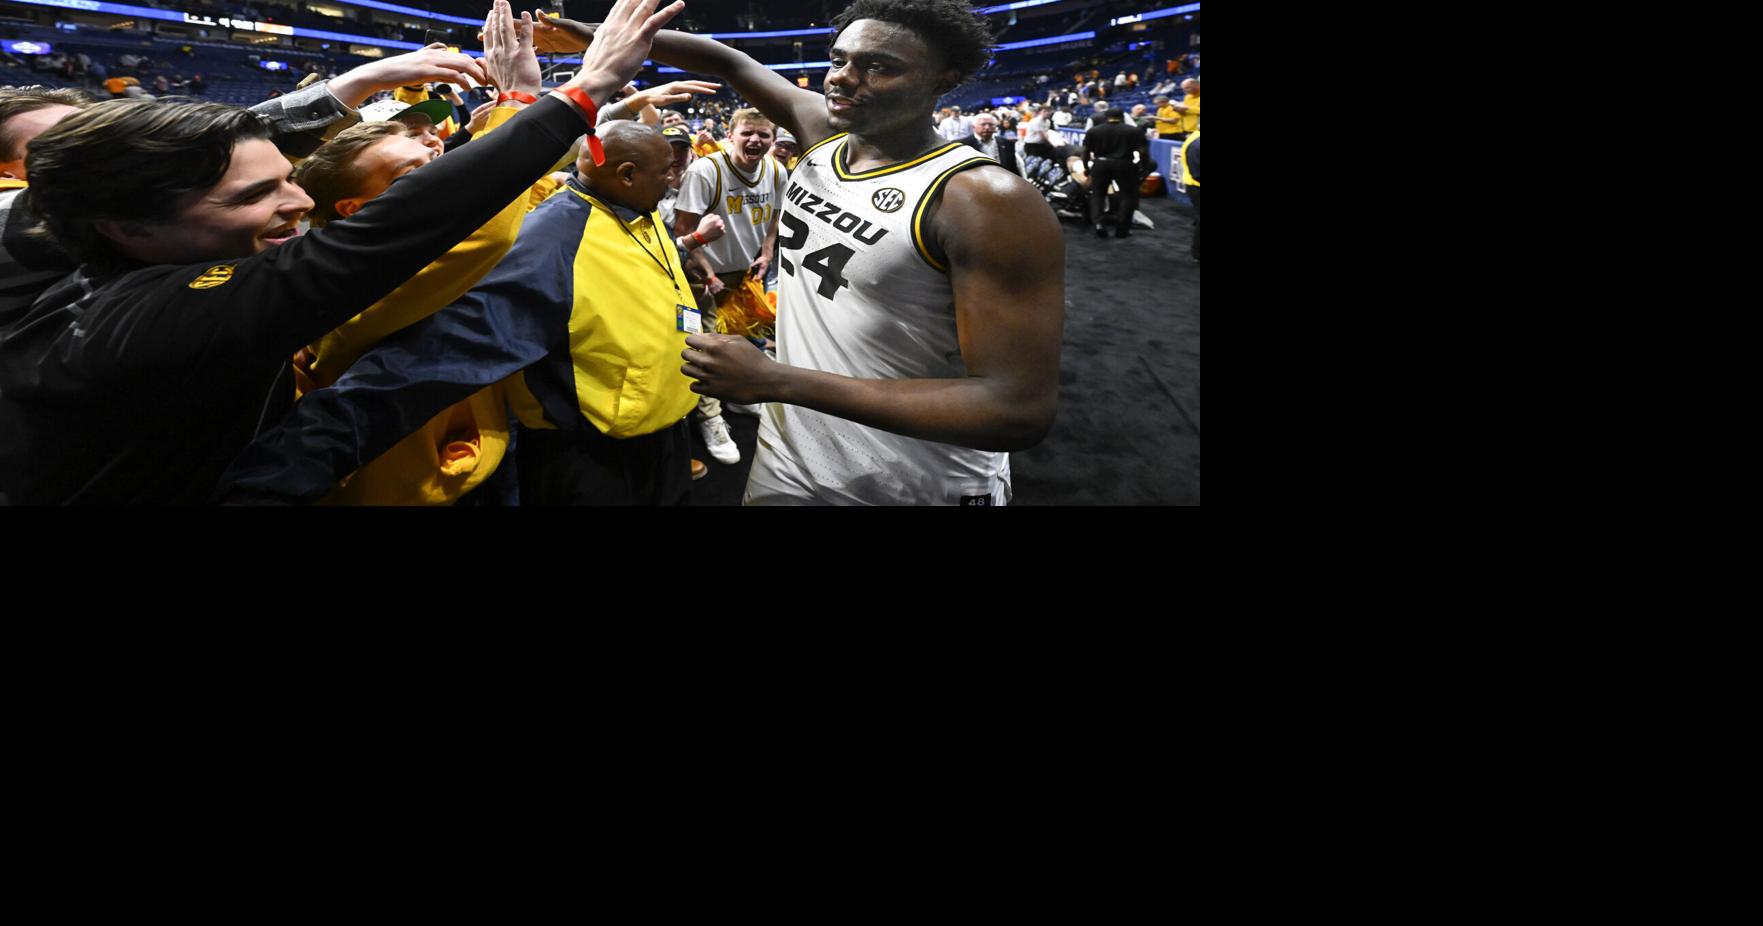 Mizzou faces top-seeded Alabama next in Nashville but this time with Kobe Brown